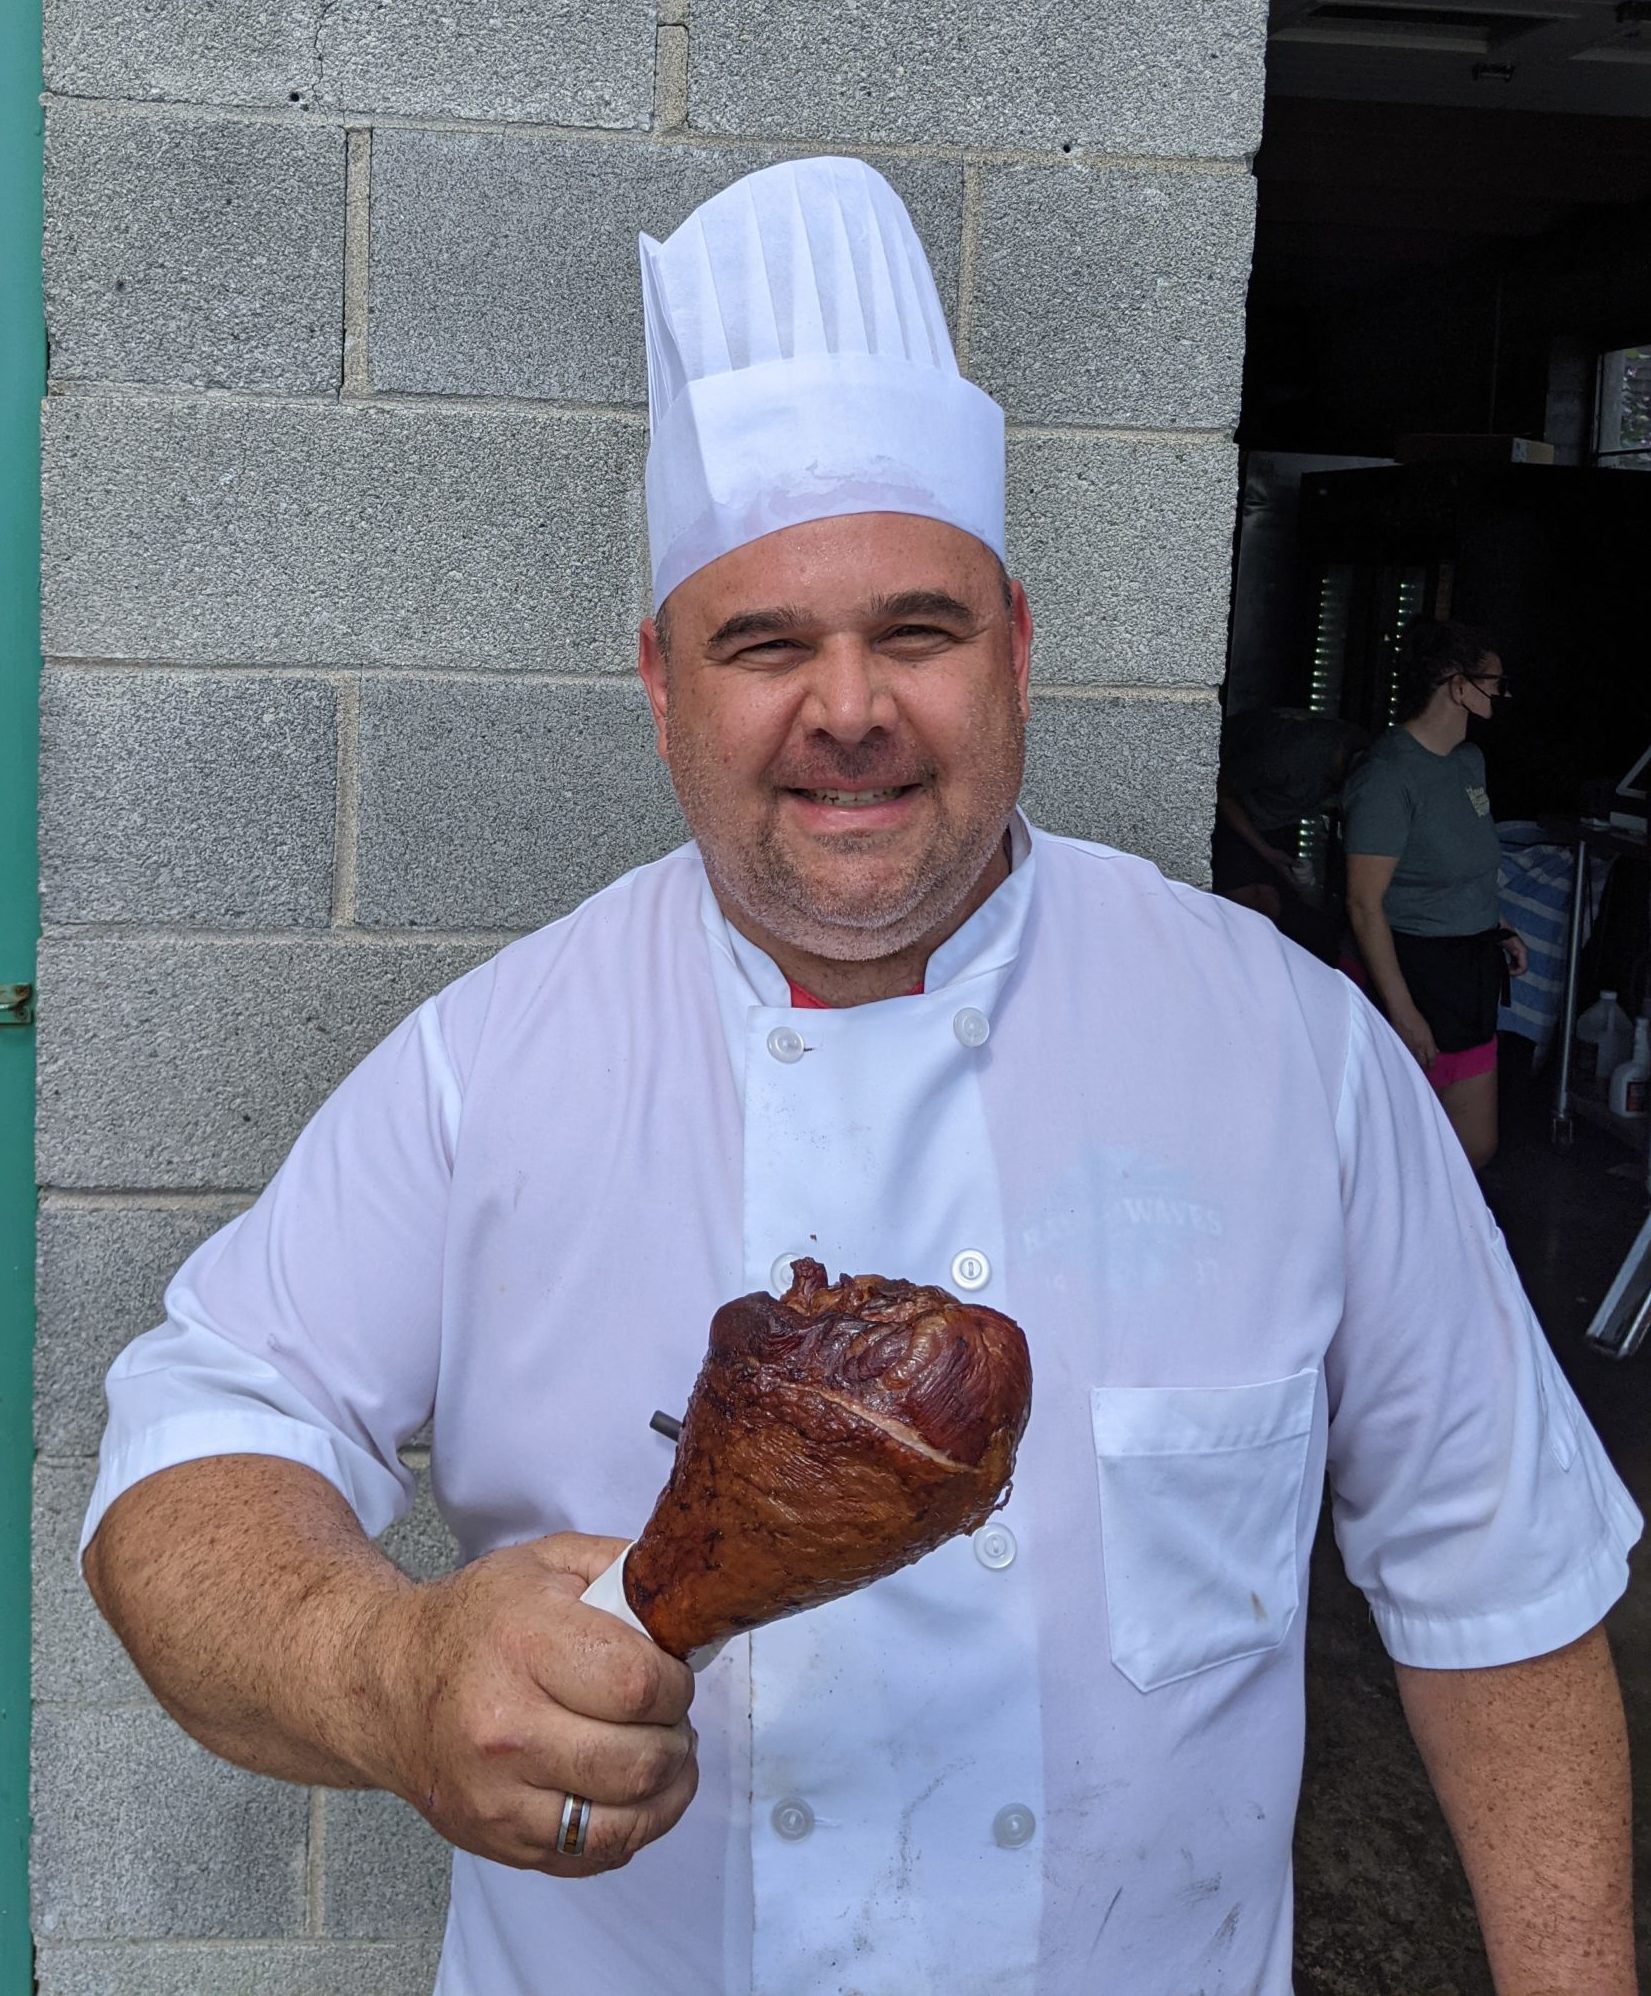 Chef Luca holding a Turkey Leg outside of the Farm Building.